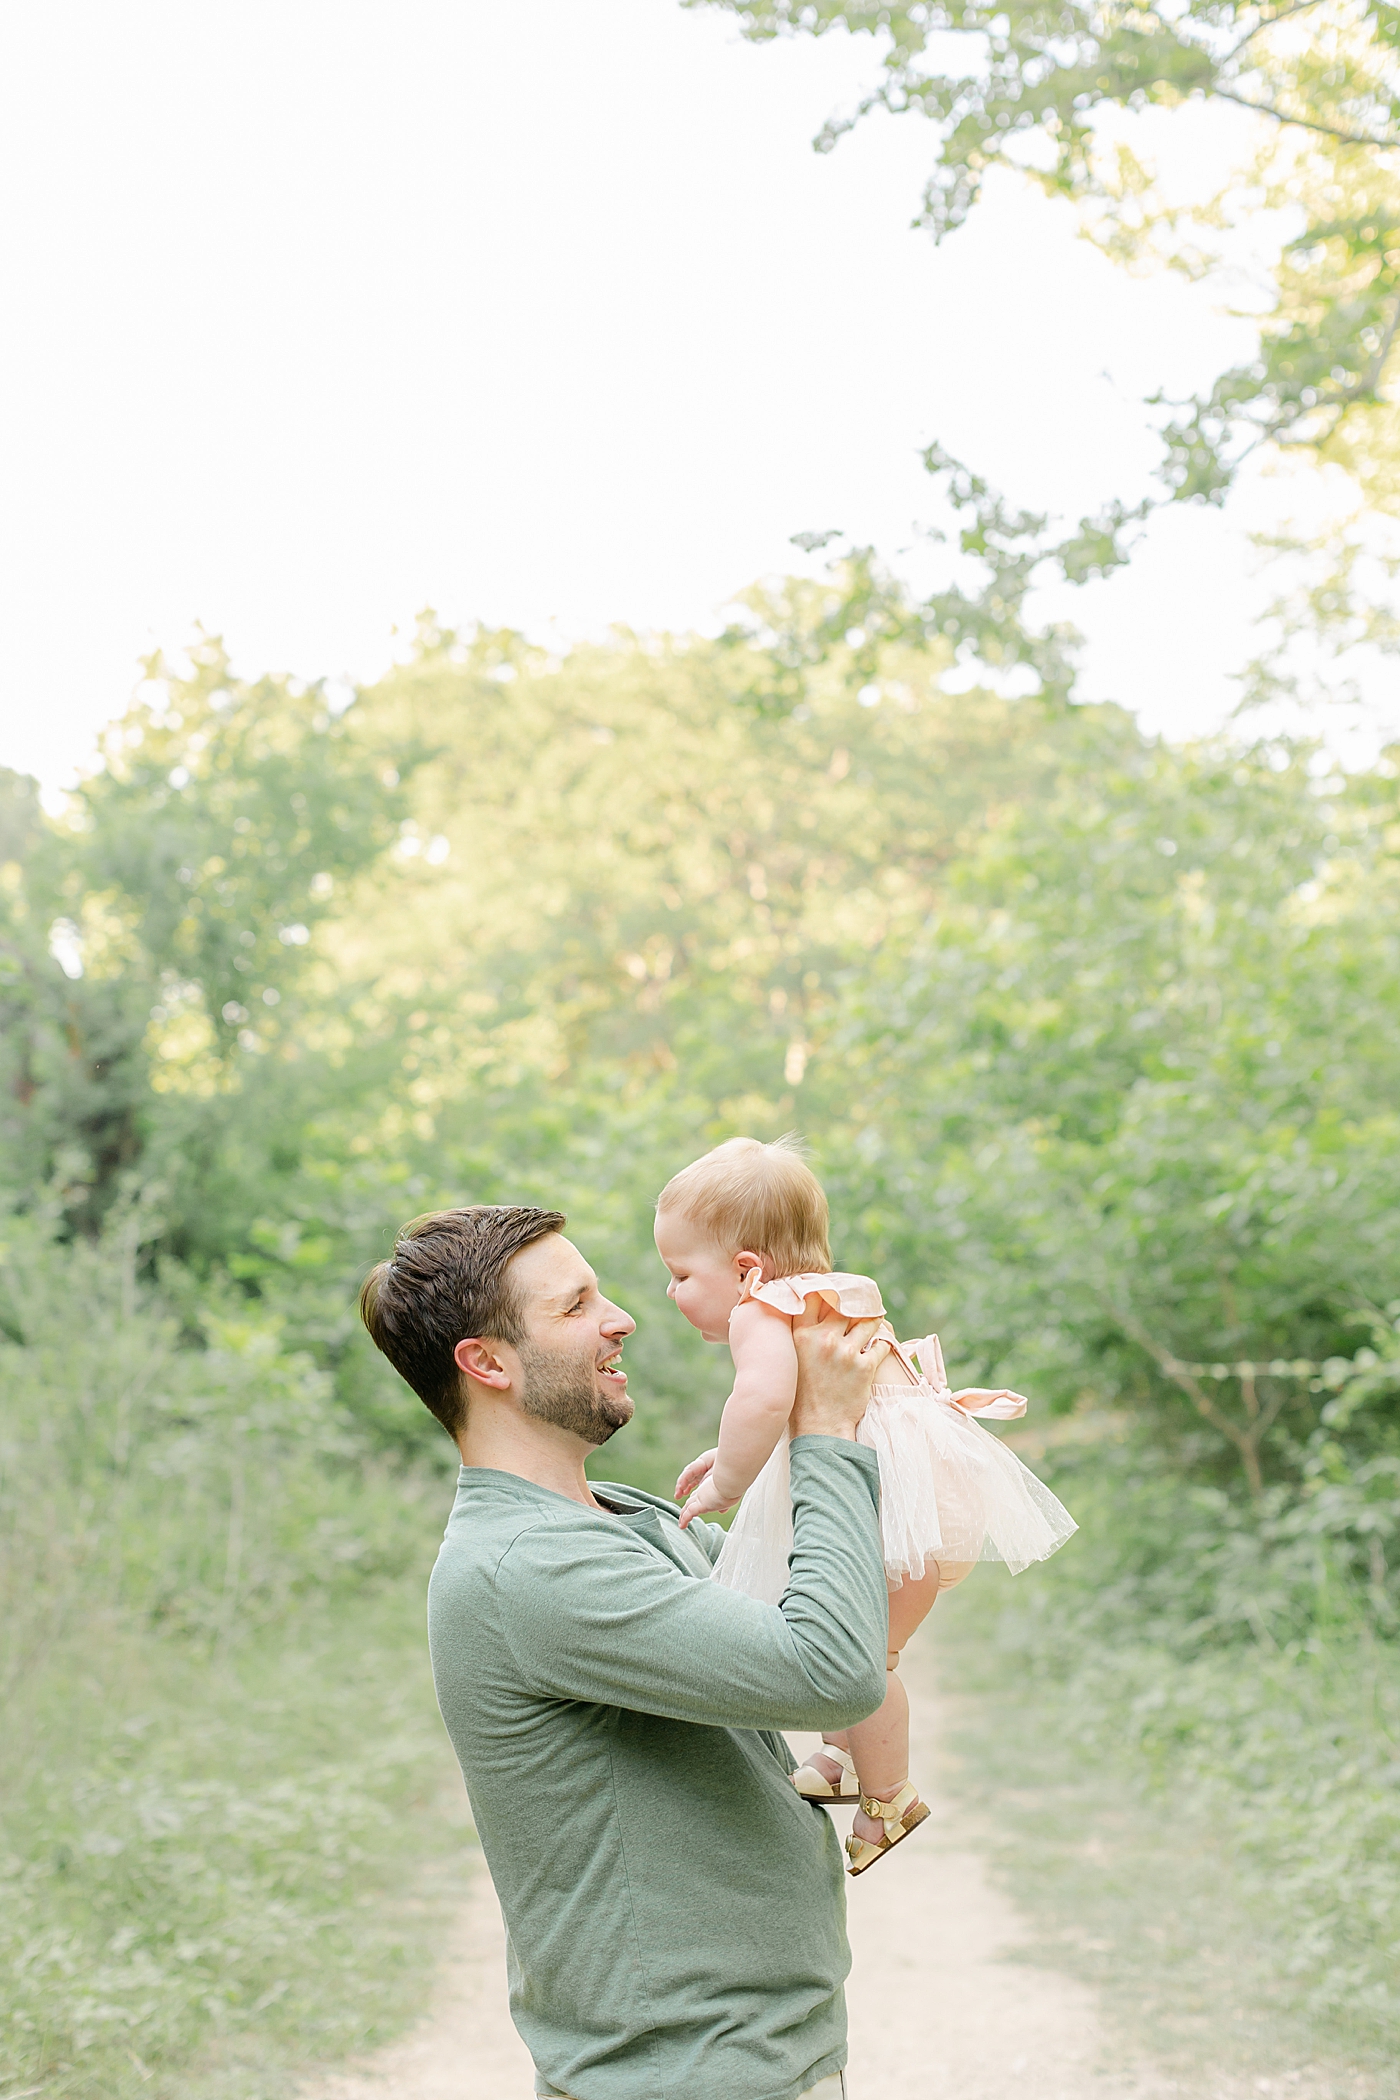 Dad in a green shirt holding his baby girl in a peach dress | Sana Ahmed Photography